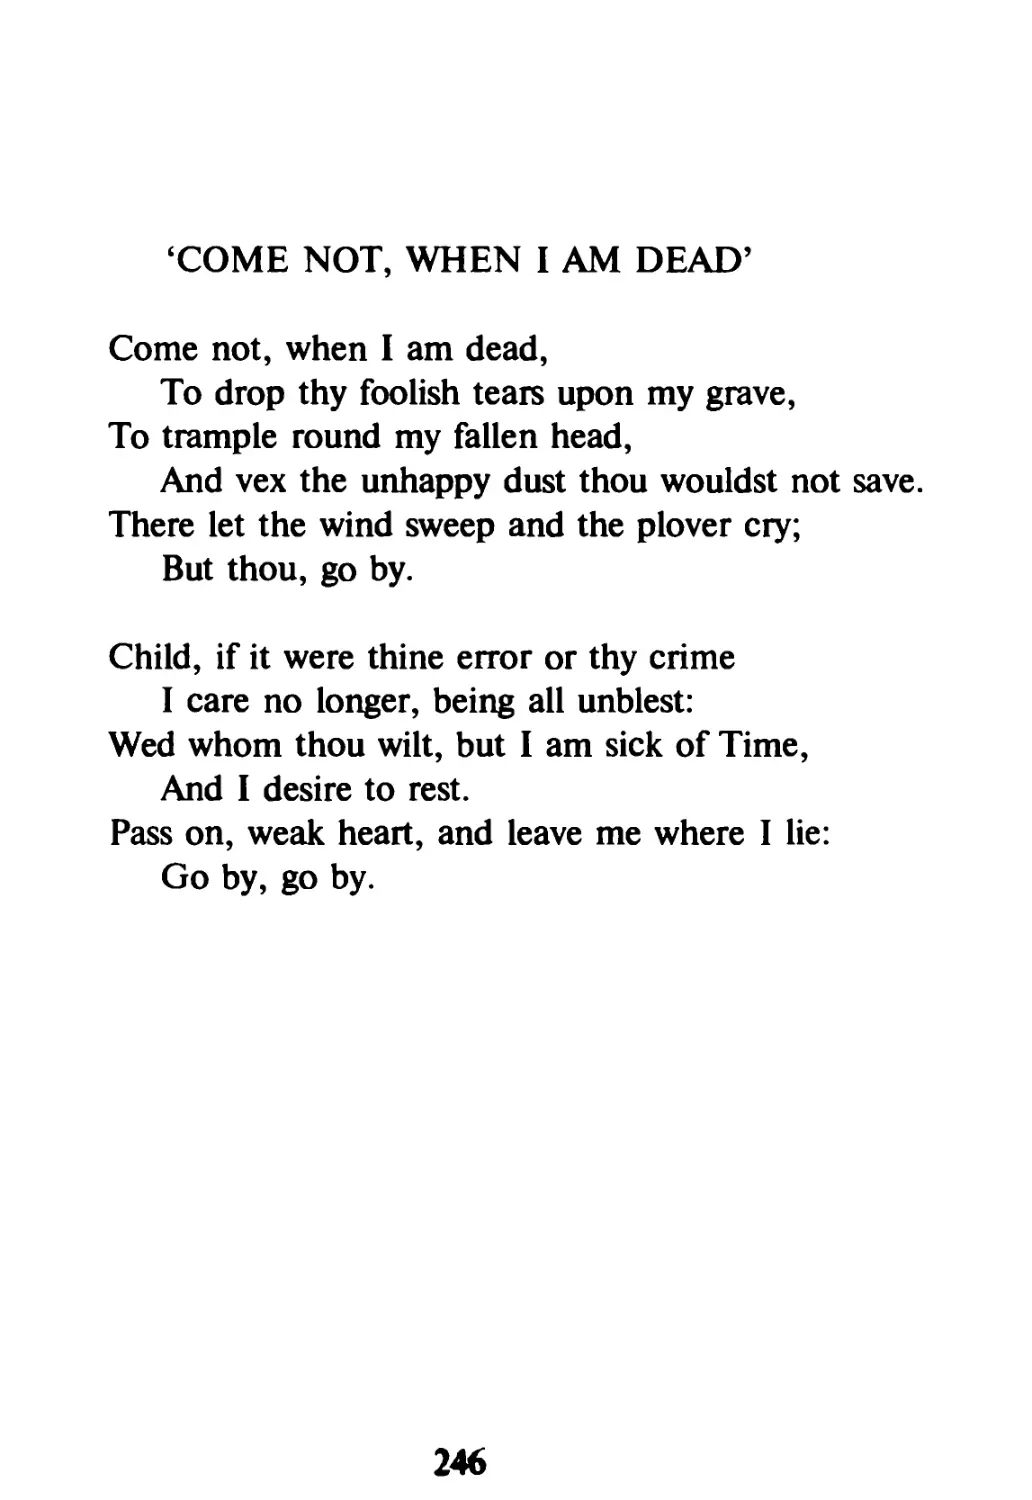 'Come not, when I am dead